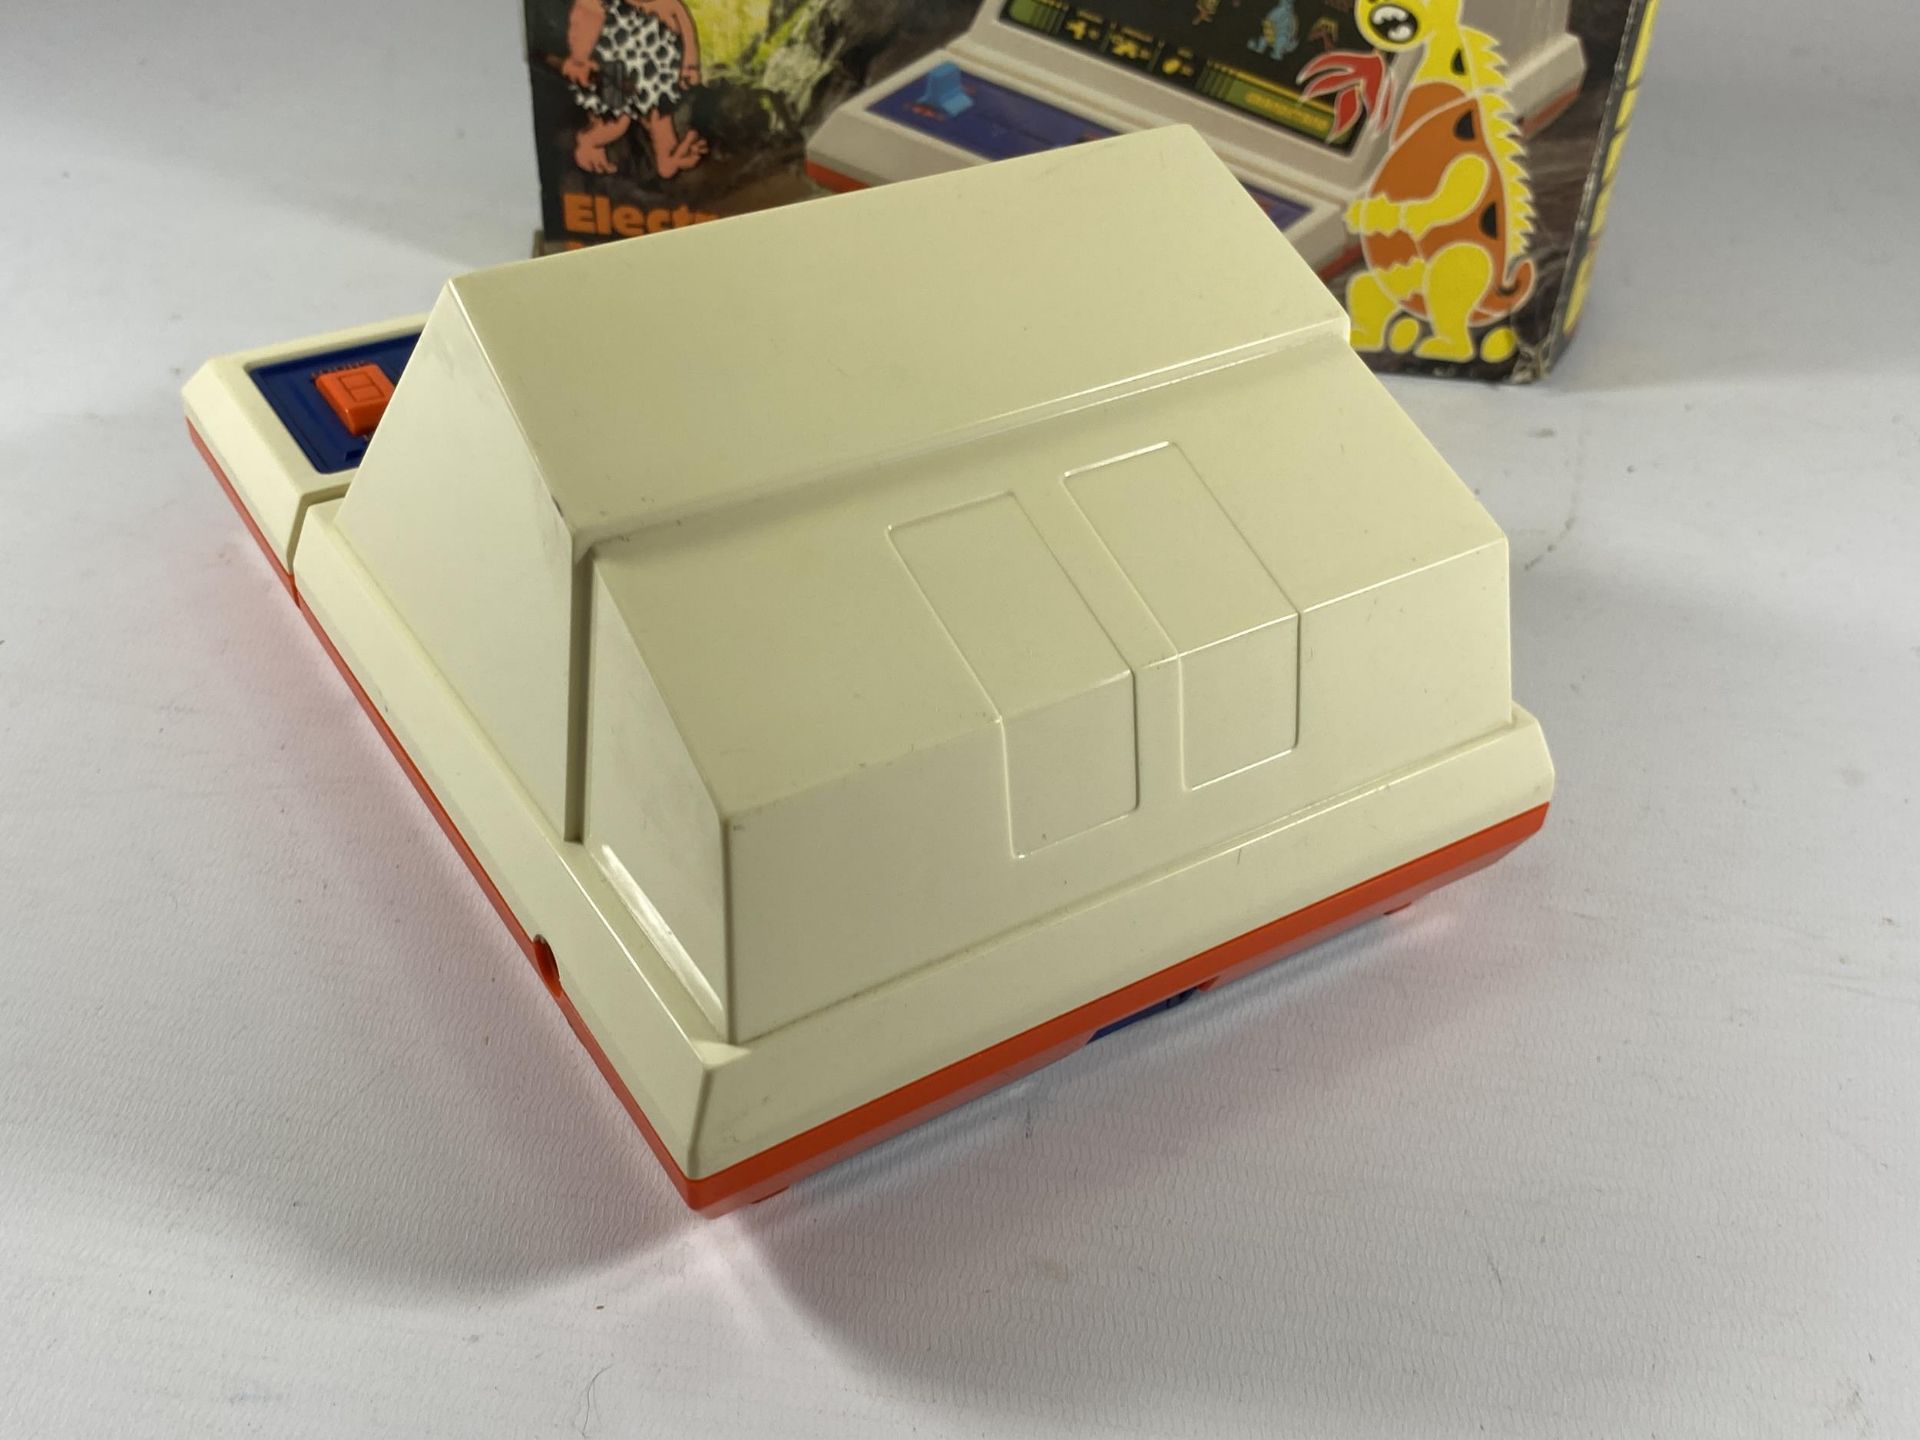 A RETRO BOXED GRANDSTAND CAVE MAN ELECTRONIC MINI ARCADE GAME - Image 3 of 3